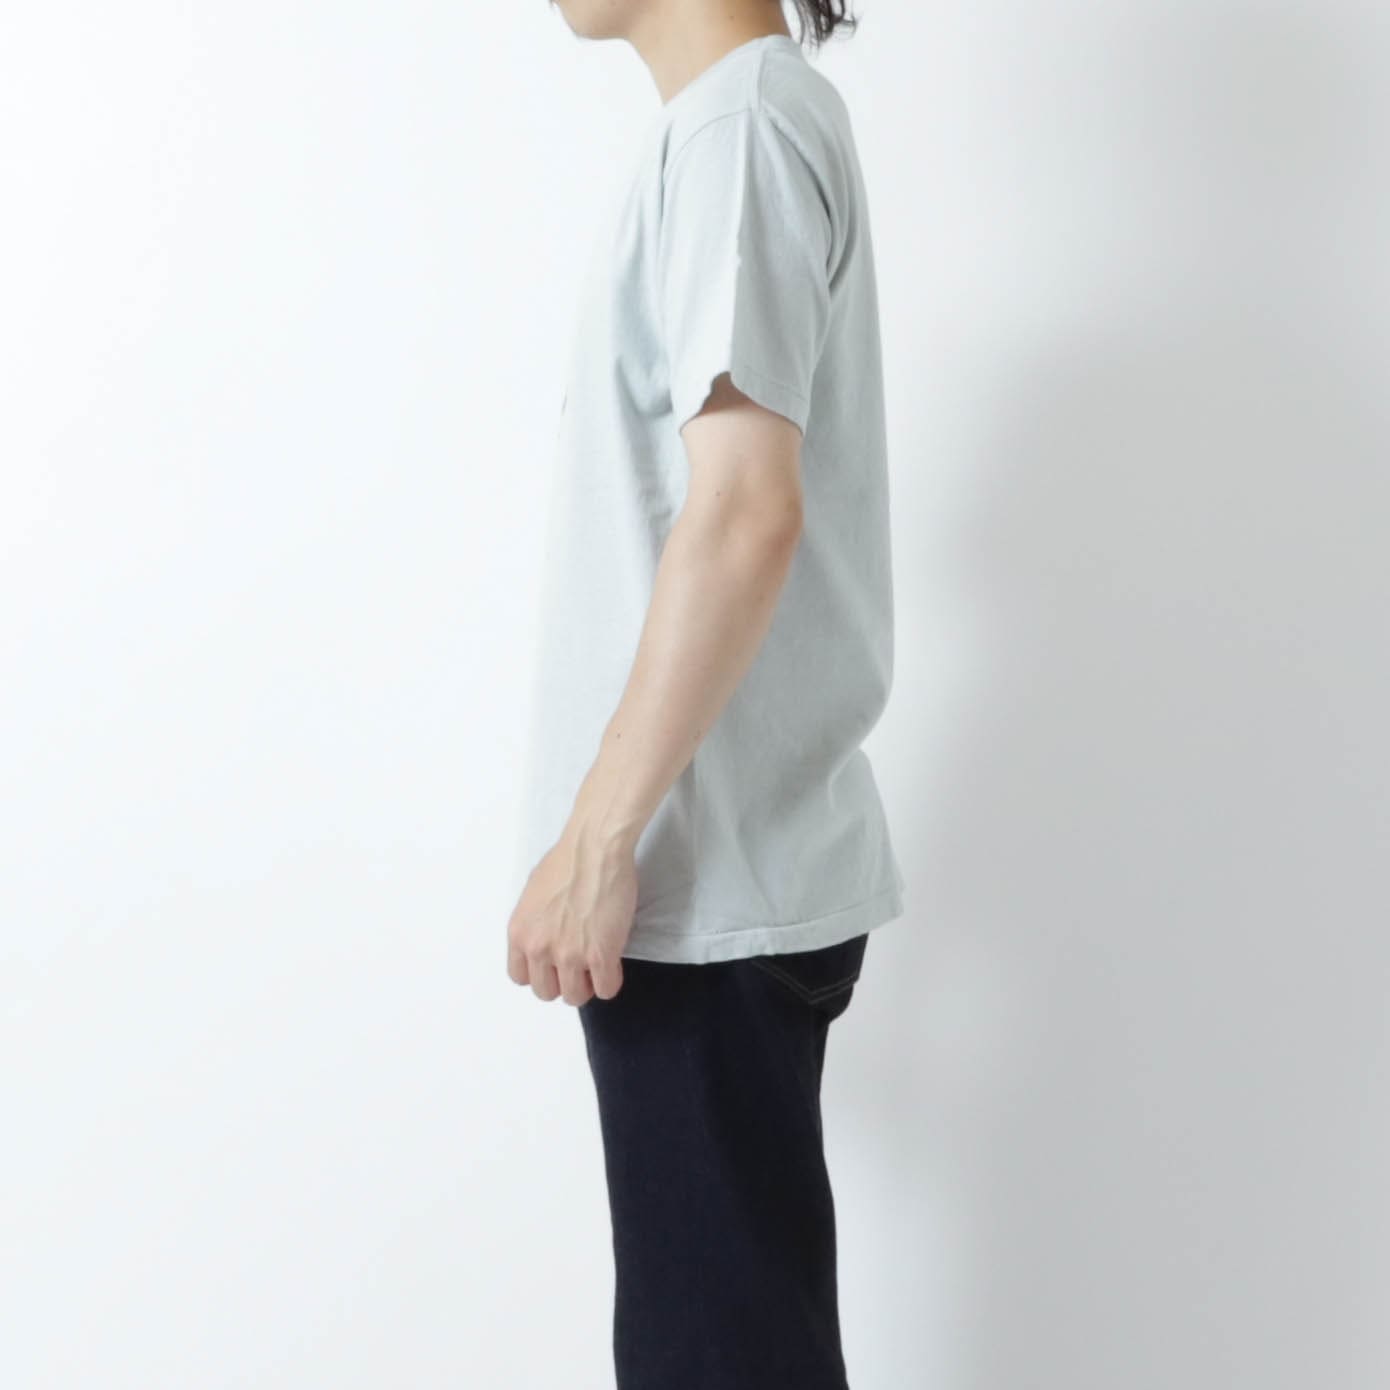 Printed Tee【I ONLY PARTY】_HEATHER GRAY 